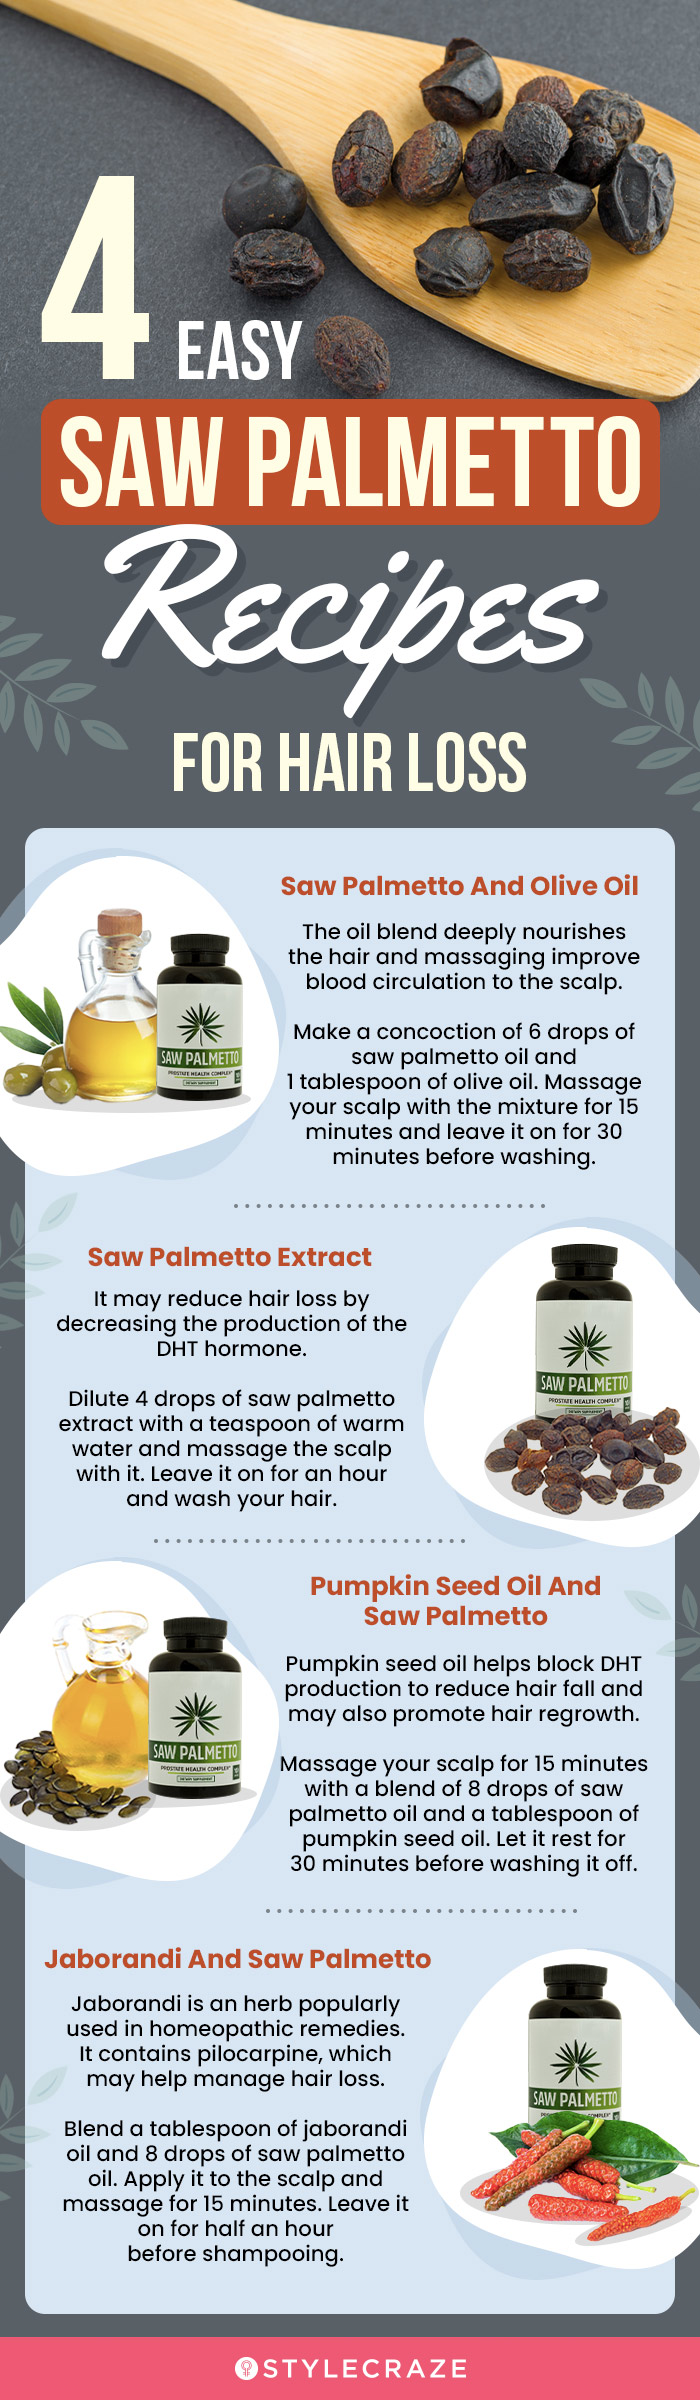 Saw Palmetto Hair Loss: Healthy Long Hair Loss Prevention and Fast Regrowth!  Grow Beautiful, Healthy, Natural Hair by Max Prescott | Goodreads